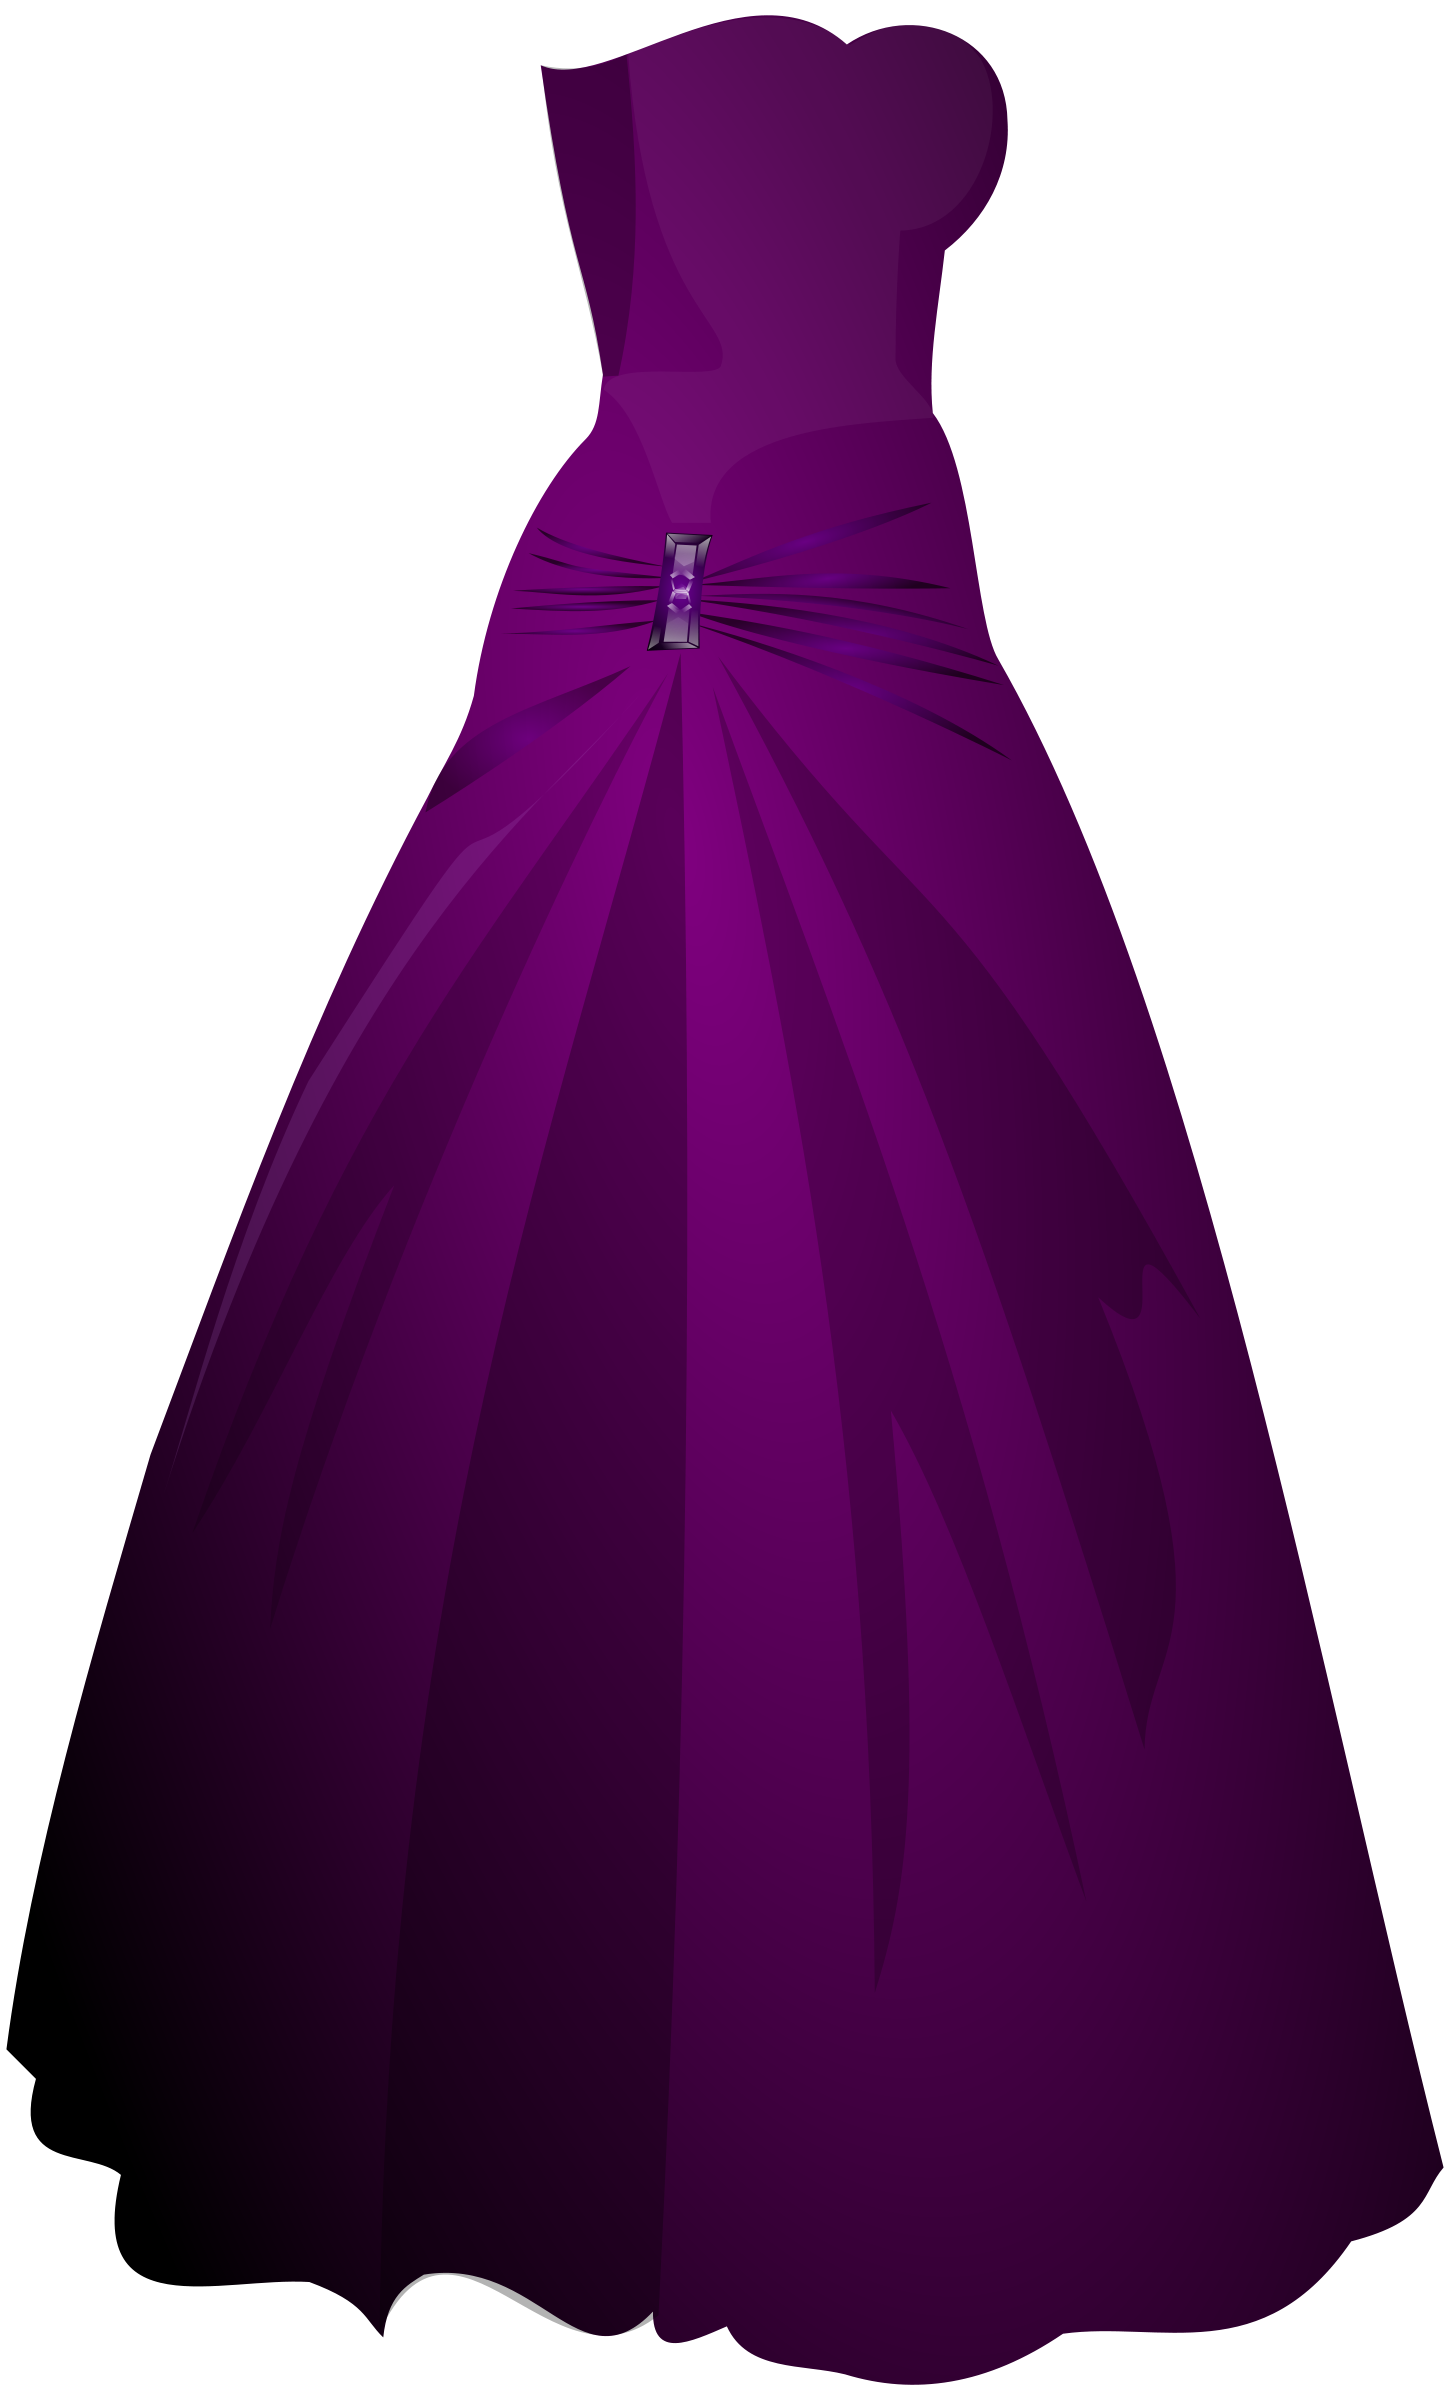 Gown 20clipart   Clipart Panda   Free Clipart Images